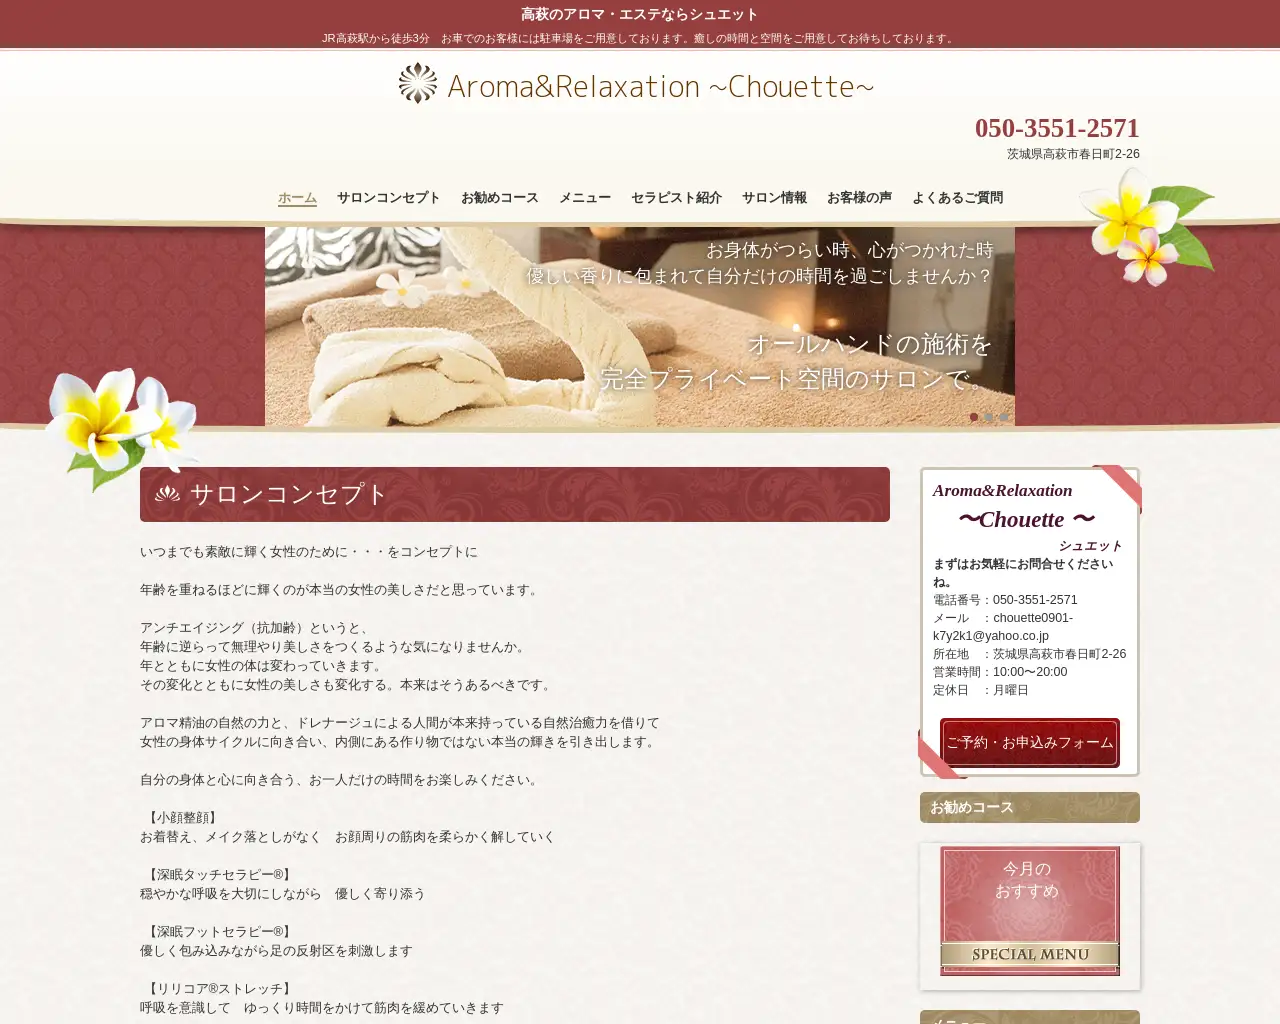 Aroma&Relaxation Chouette site